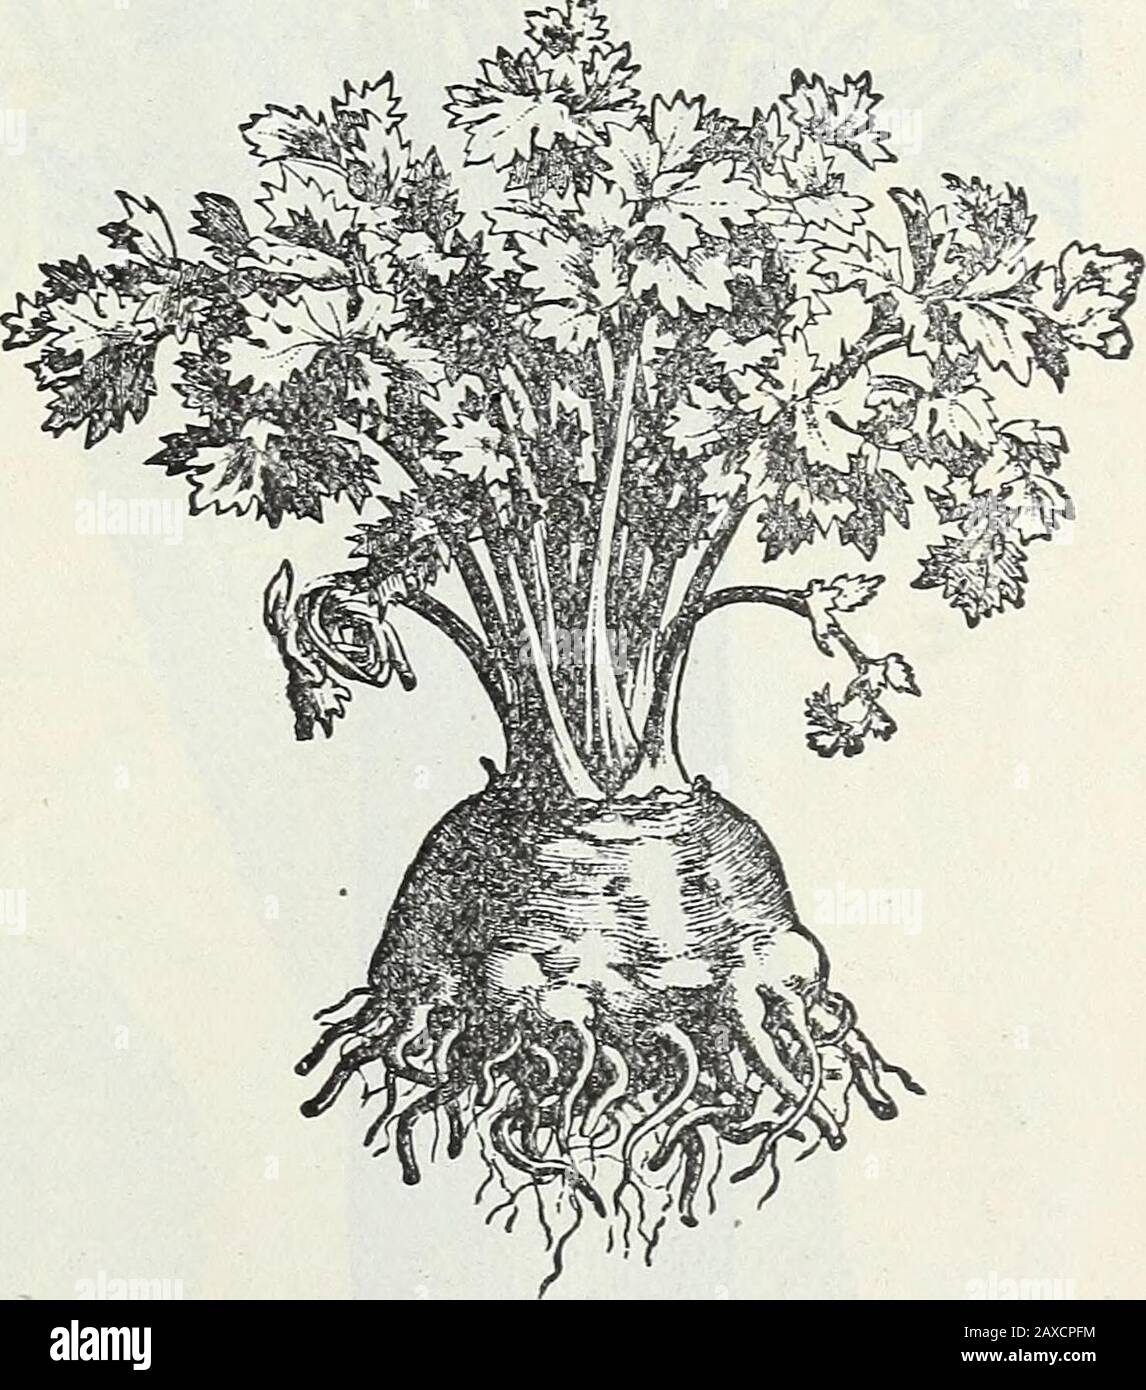 Steckler's seed catalogue and garden manual for the southern states : 1902 . Dwarf Large Ribbed Celery.. Celeriac or Turnip -Rooted Celery.kaa always produced a proportion of greeaplants, bat persevering selection for yearsenables them now to produce an almostabsolutely pure stock far superior to anythat has ever been offered. Our stock wasobtained from the originator. Hammers and Anvils for beating French Blades, 60 J. STECKXER SEED CO., I/TD., ALMANAC AND *Giant Pascal. This is a se-lection from the New Golden Self-Blanching Celery; it partakes cfthe best qualities of that variety,but it is Stock Photo